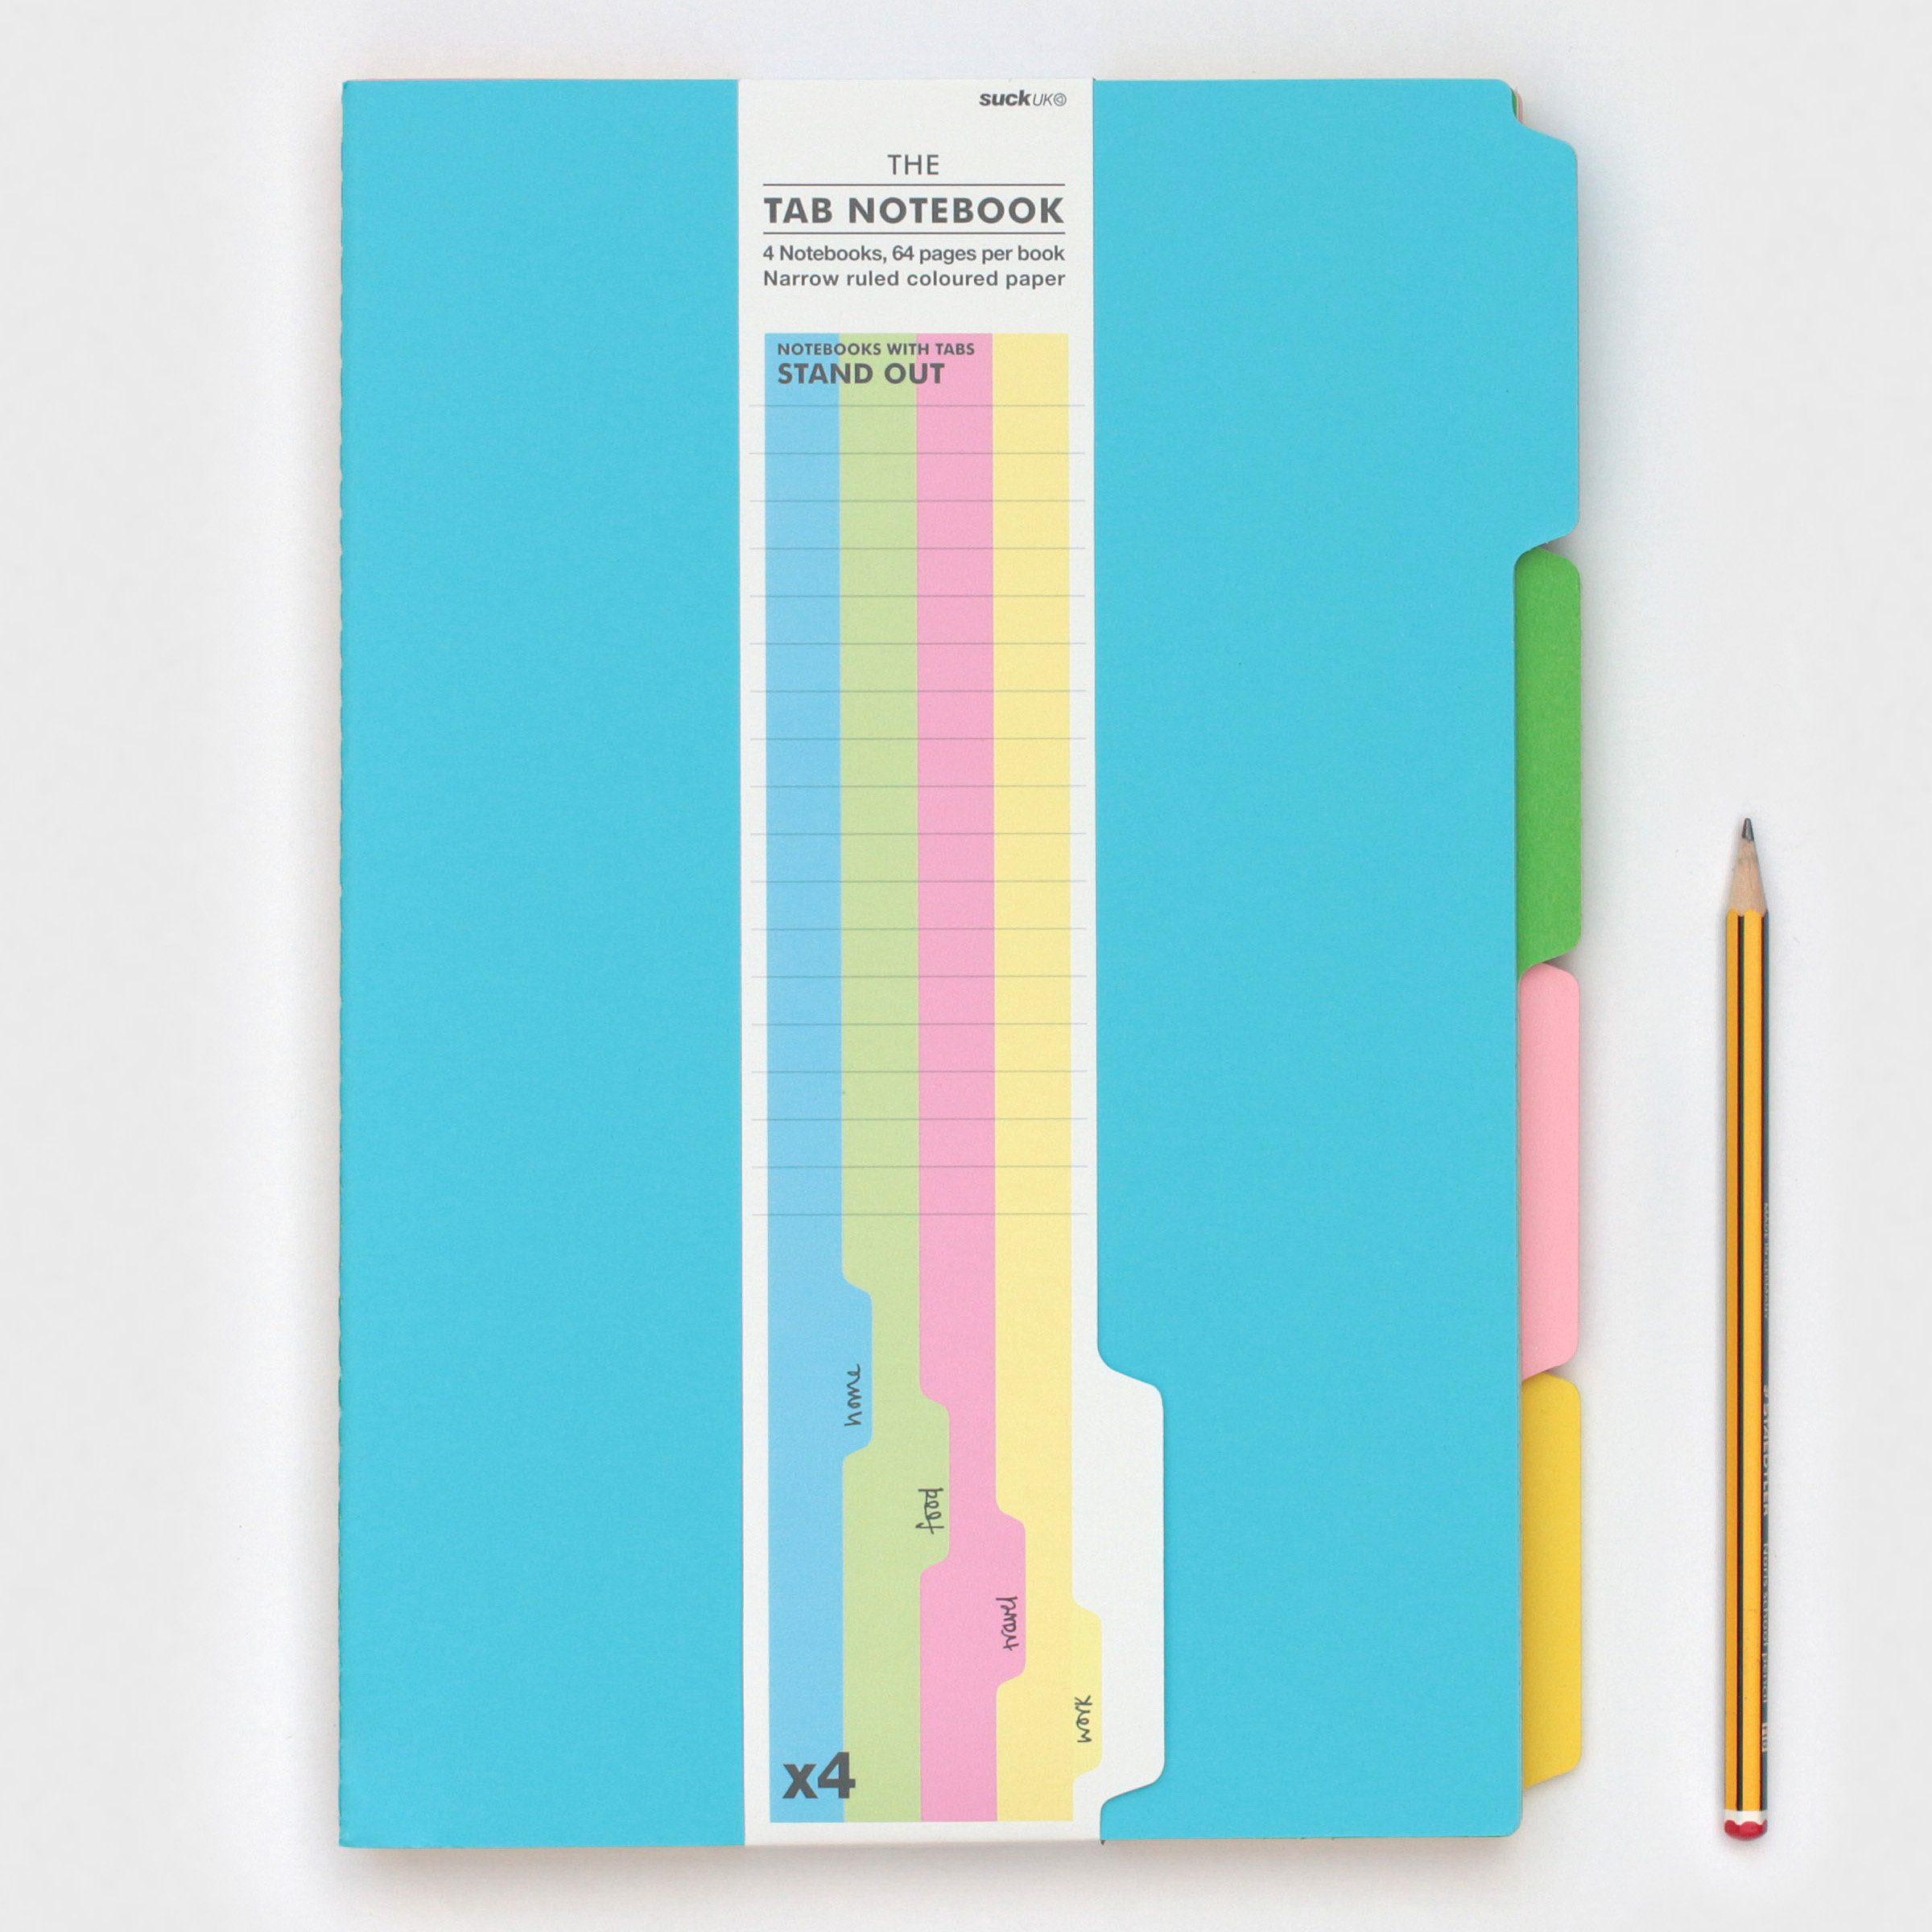 Large A4 Colourful Notebooks with Tabs